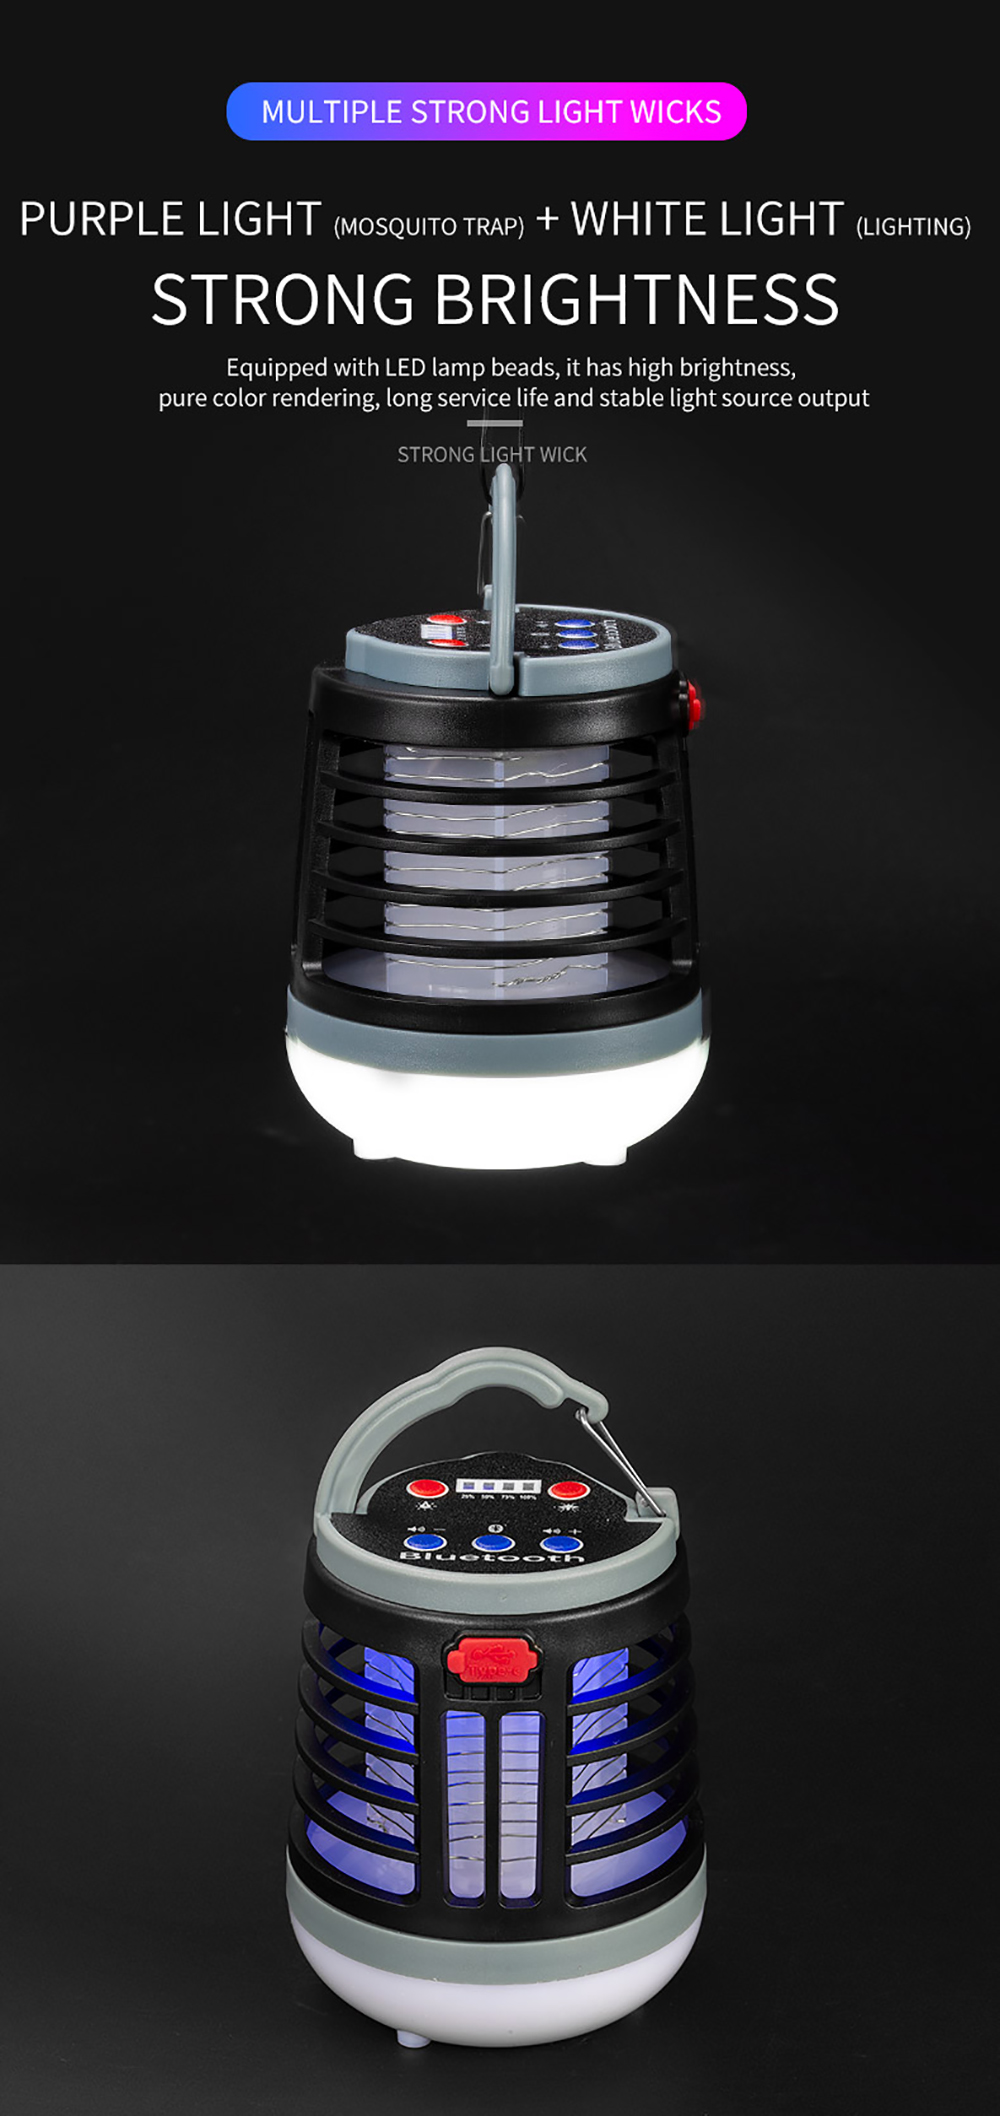 E-SMARTER-Multifunction-Mosquito-Killer-Lamp-With-LED-Camping-Lightbluetooth-Speaker-USB-Rechargeabl-1933889-3